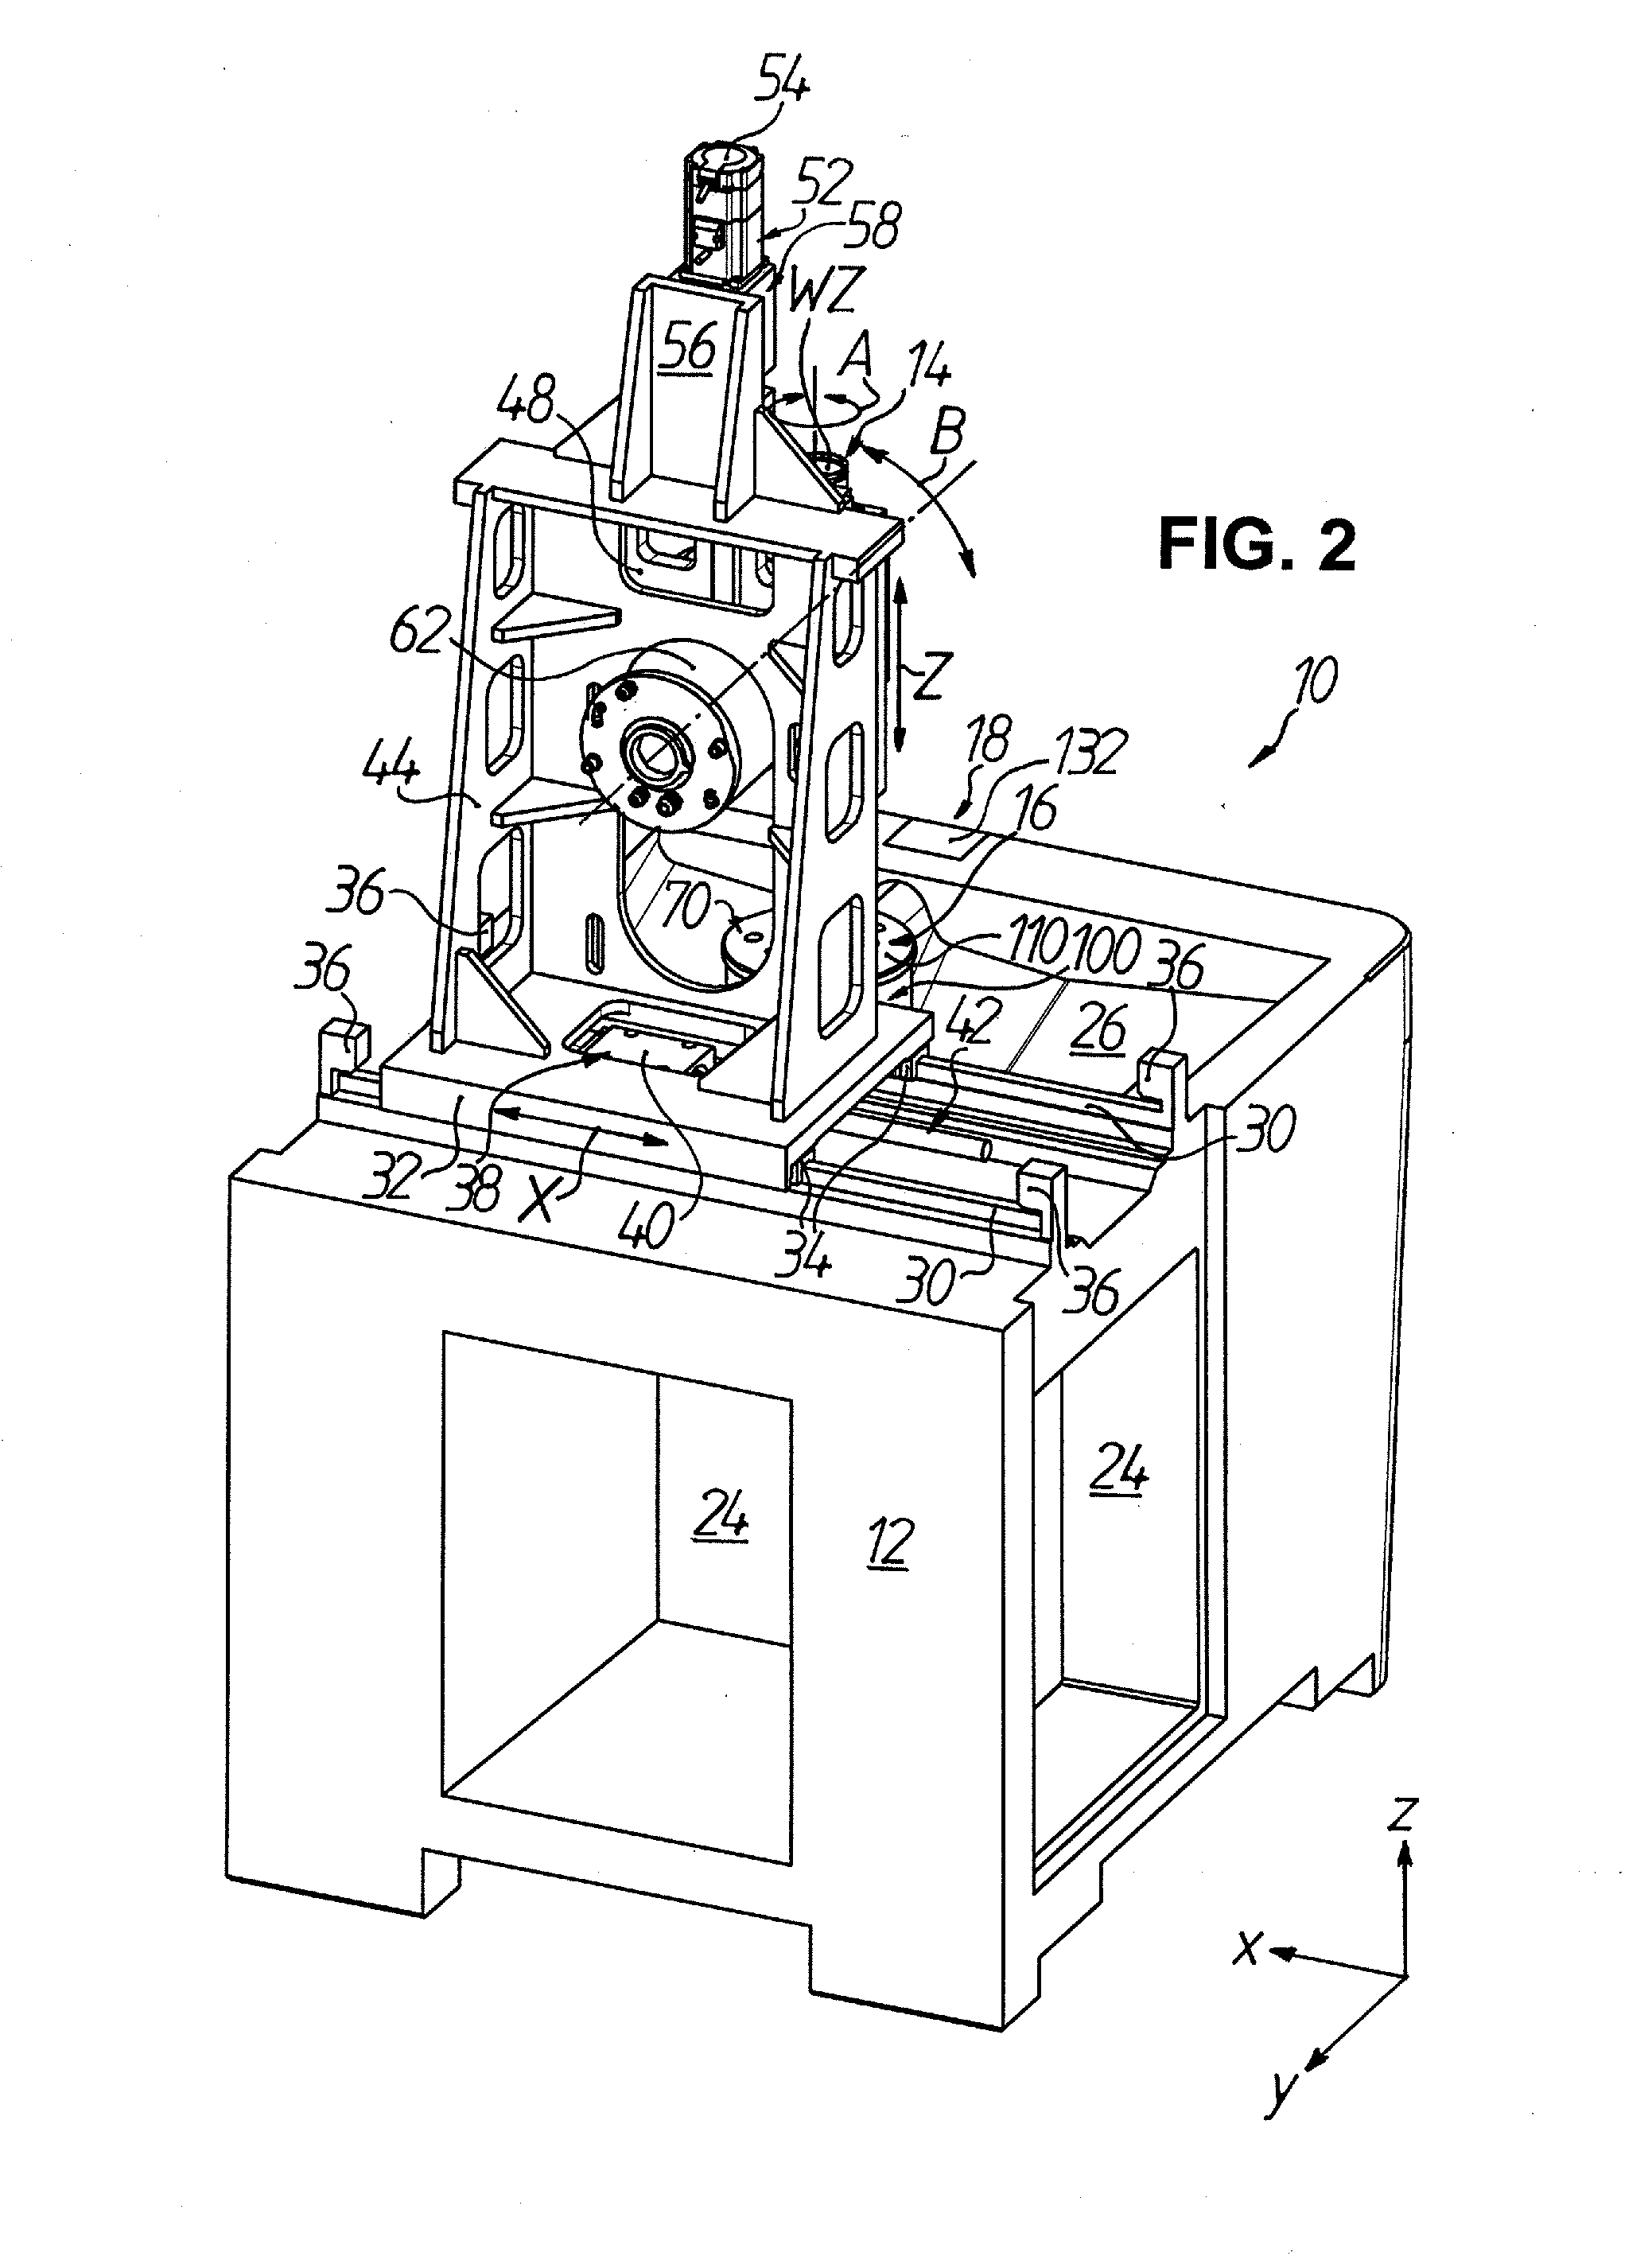 Device for Grinding, Precision-Grinding and/or Polishing of Workpieces in Optical Quality, Particularly of Spherical Lens Surfaces in Precision Optics